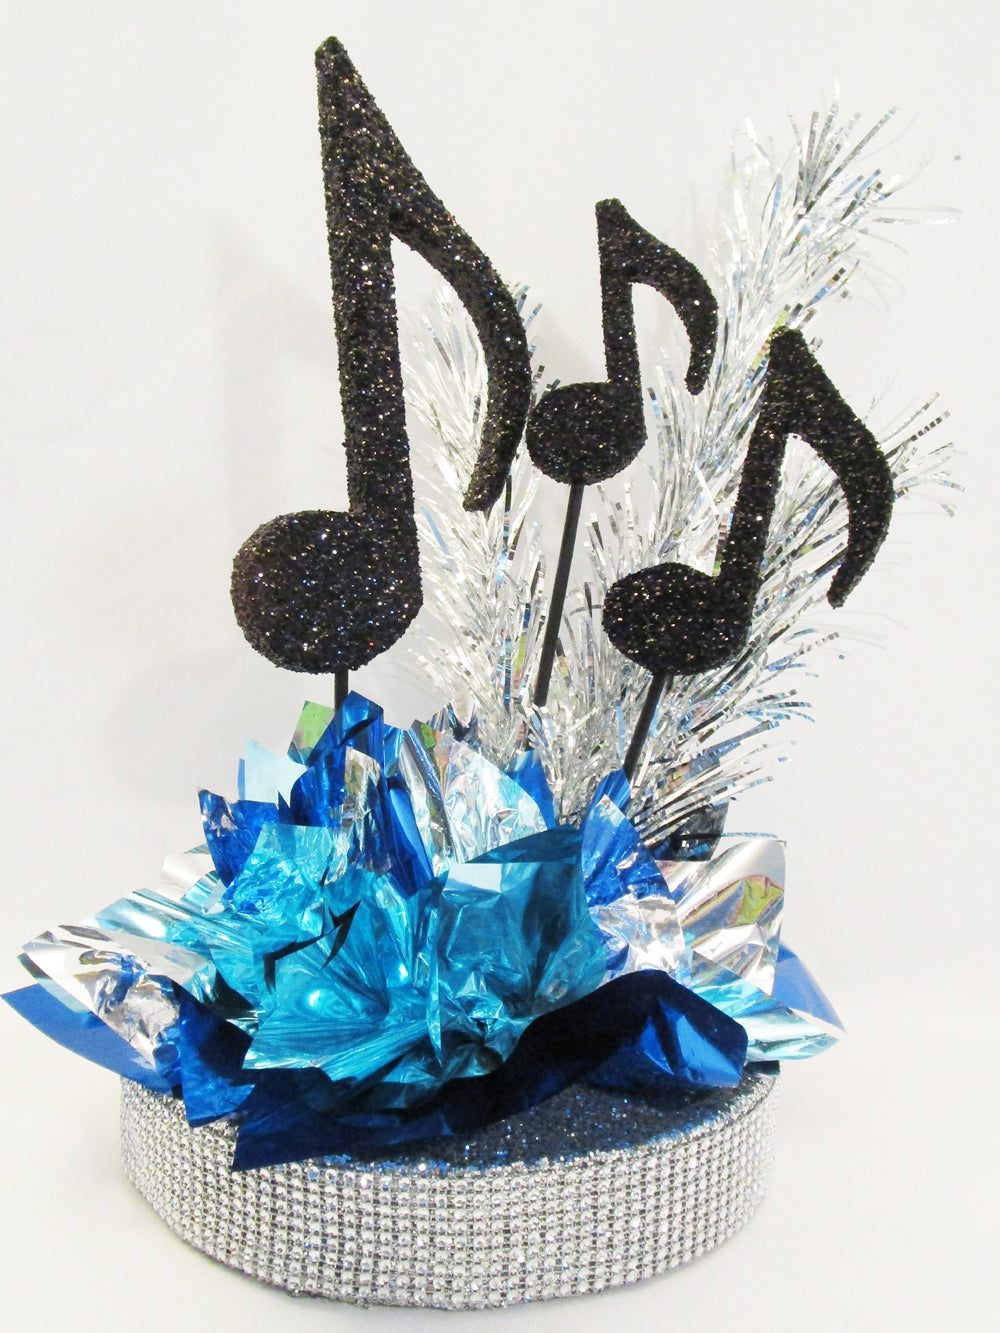 Musical notes table centerpiece - Designs by Ginny